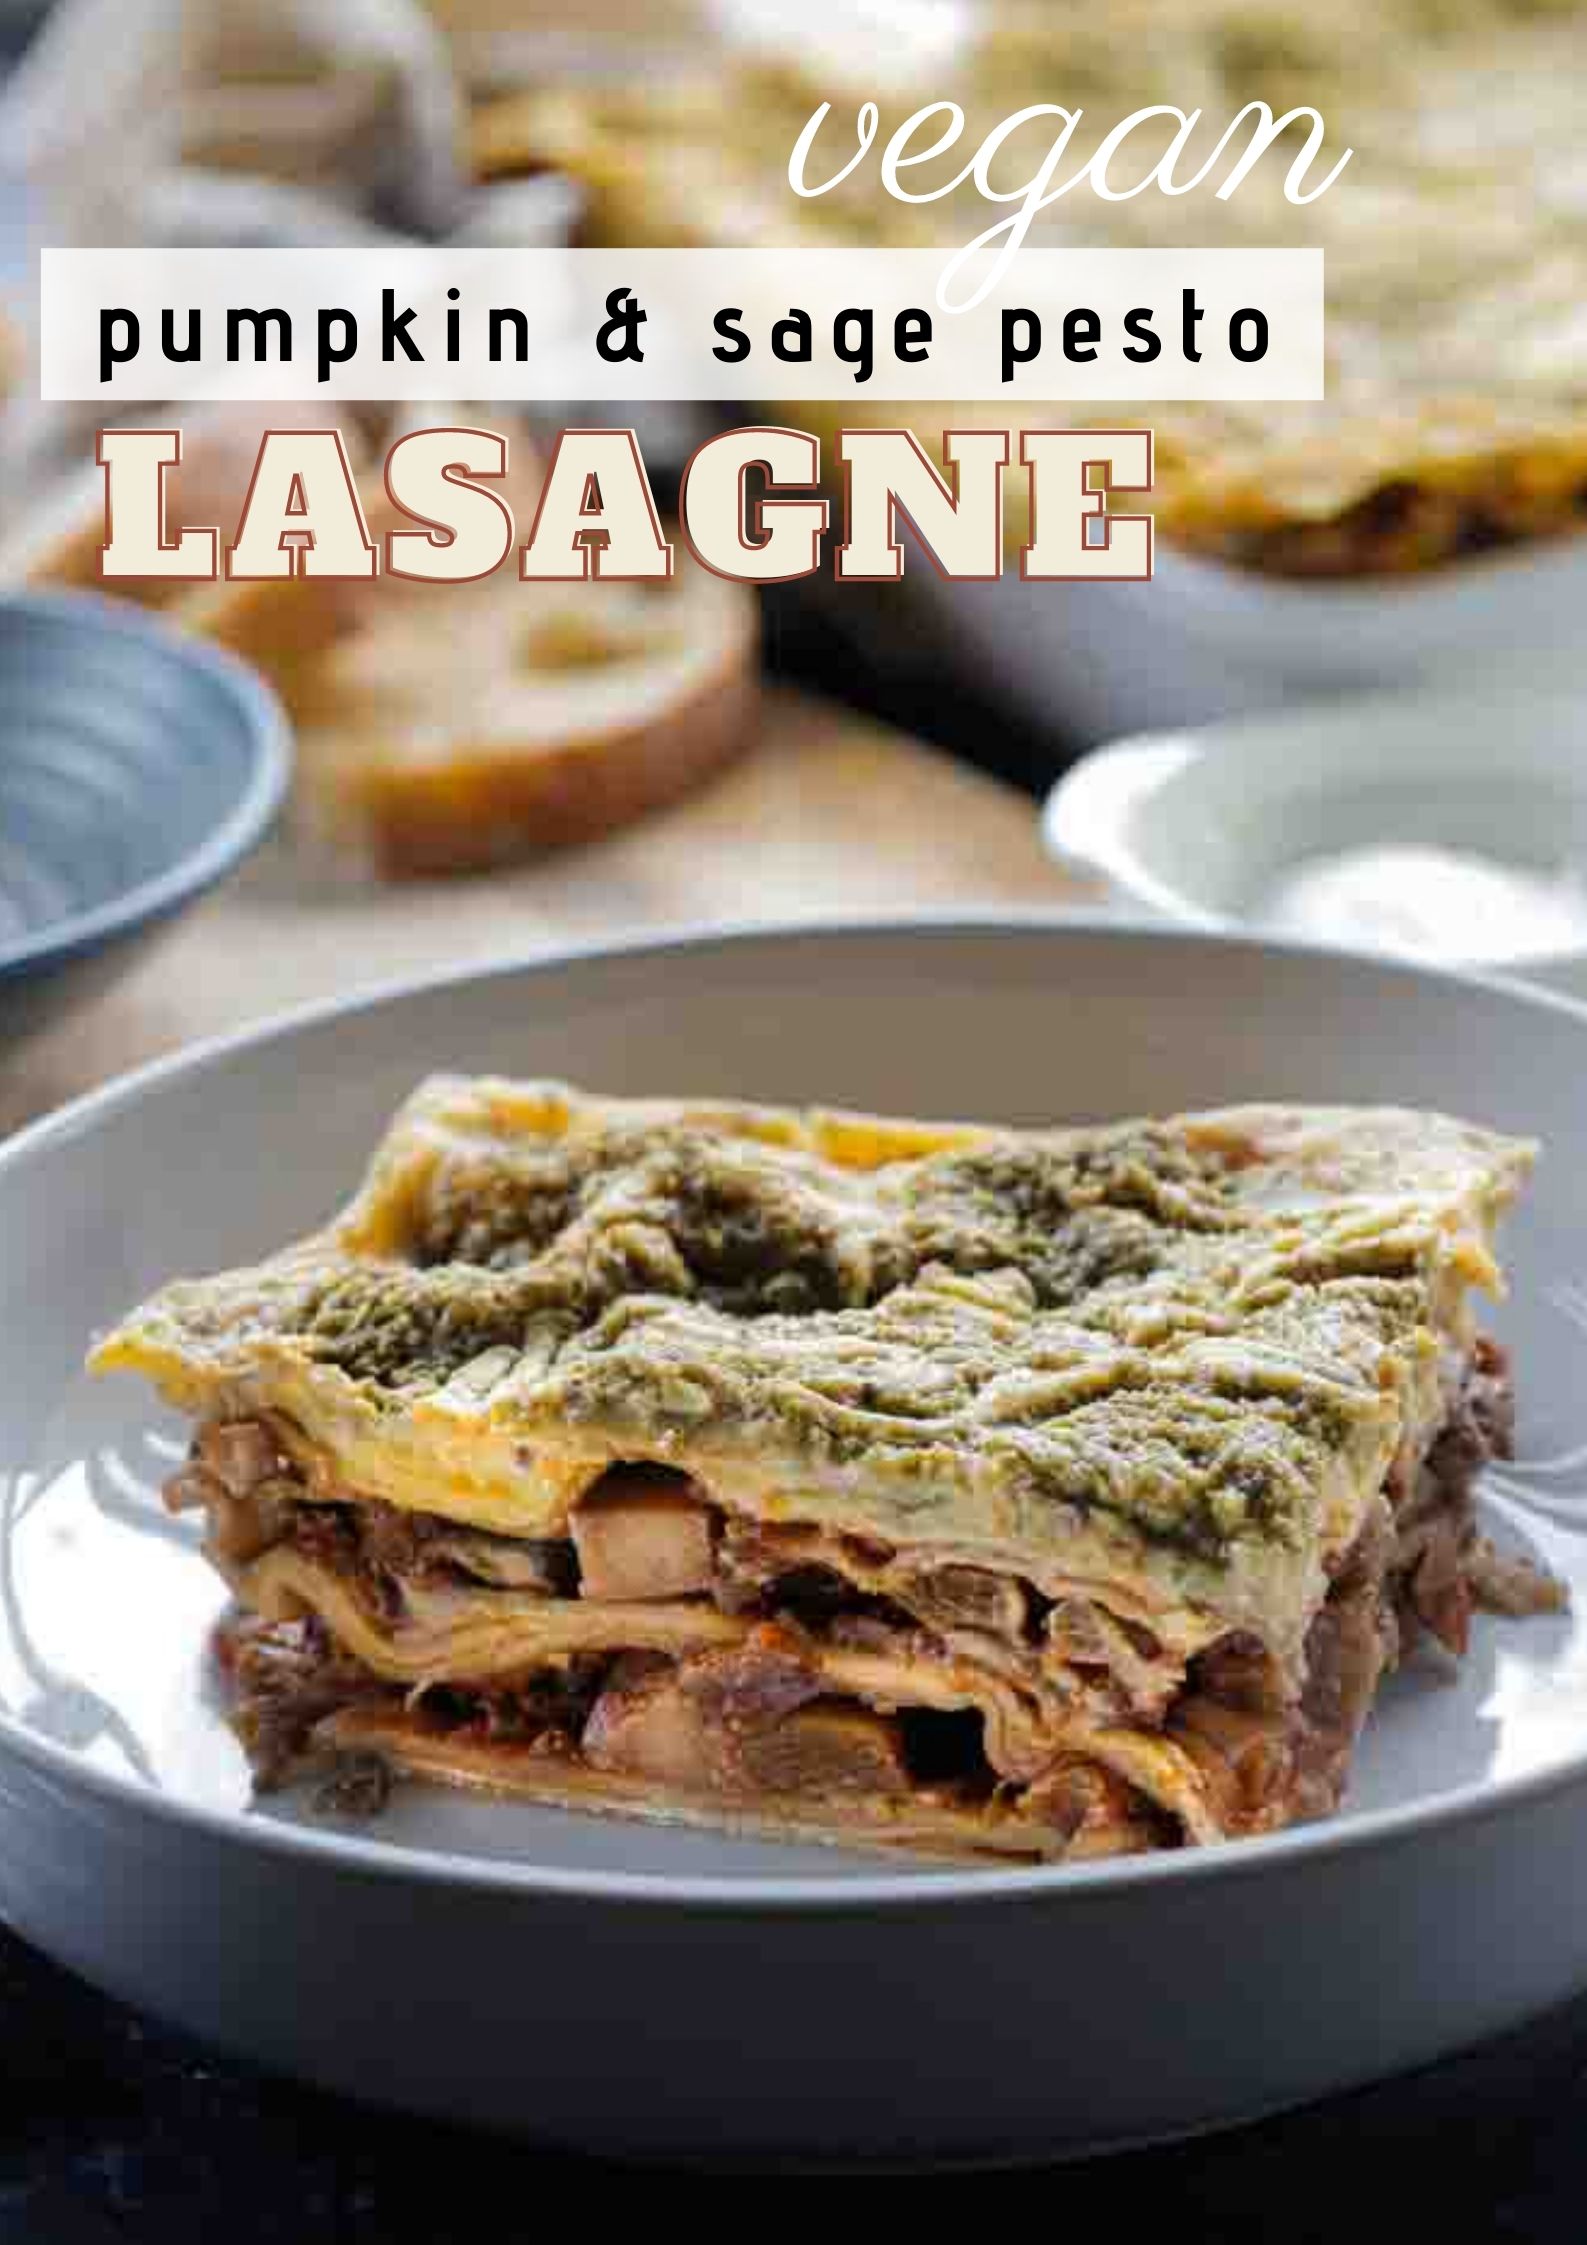 Deliciously vegan pumpkin lasagne with a dash of wine, tonnes of veggies and flavour. Topped with a creamy vegan white sauce swirled with a homemade, garlicky sage and walnut pesto! Recipe on thecookandhim.com | #pumpkinrecipes #veganlasagne #pumpkinlasagne #veganrecipes #fallrecipes #autumnrecipes #veganpesto #easypesto #vegetarian #dairyfree #meatfree